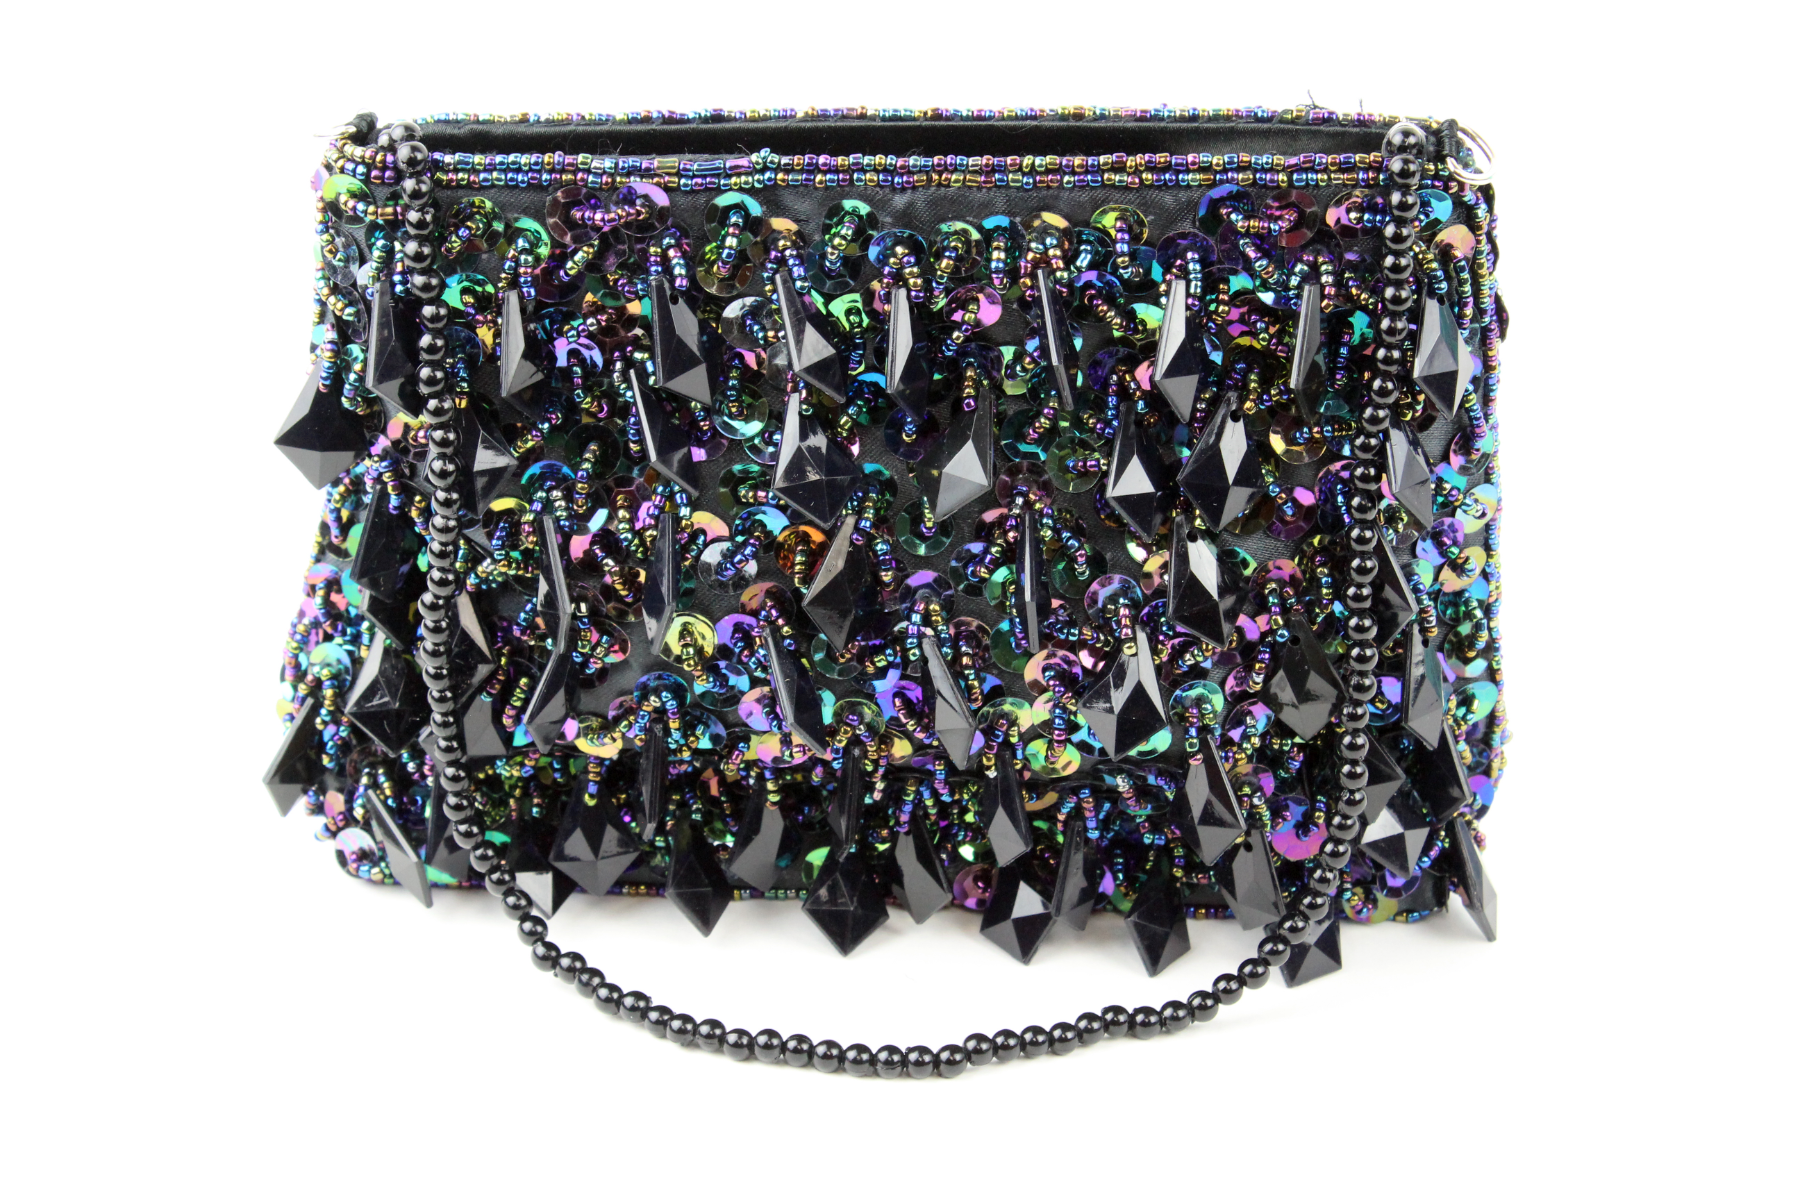 Carry everything you need in style with the "Yi and Yi" Beaded Mini Bag. Brighten up a black dress and keep your color scheme dark at the same time.